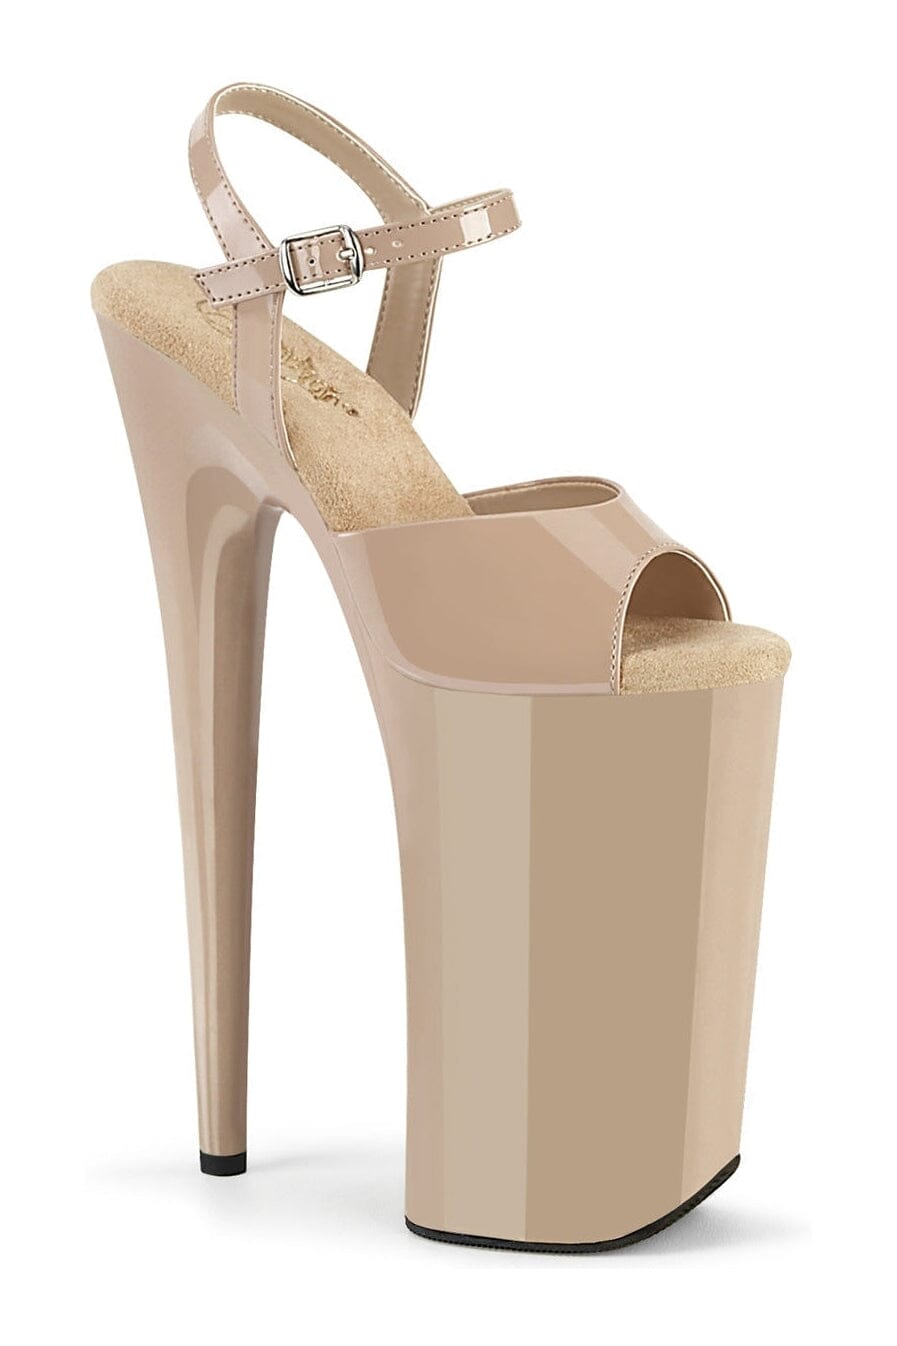 BEYOND-009 Nude Patent Sandal-Sandals- Stripper Shoes at SEXYSHOES.COM